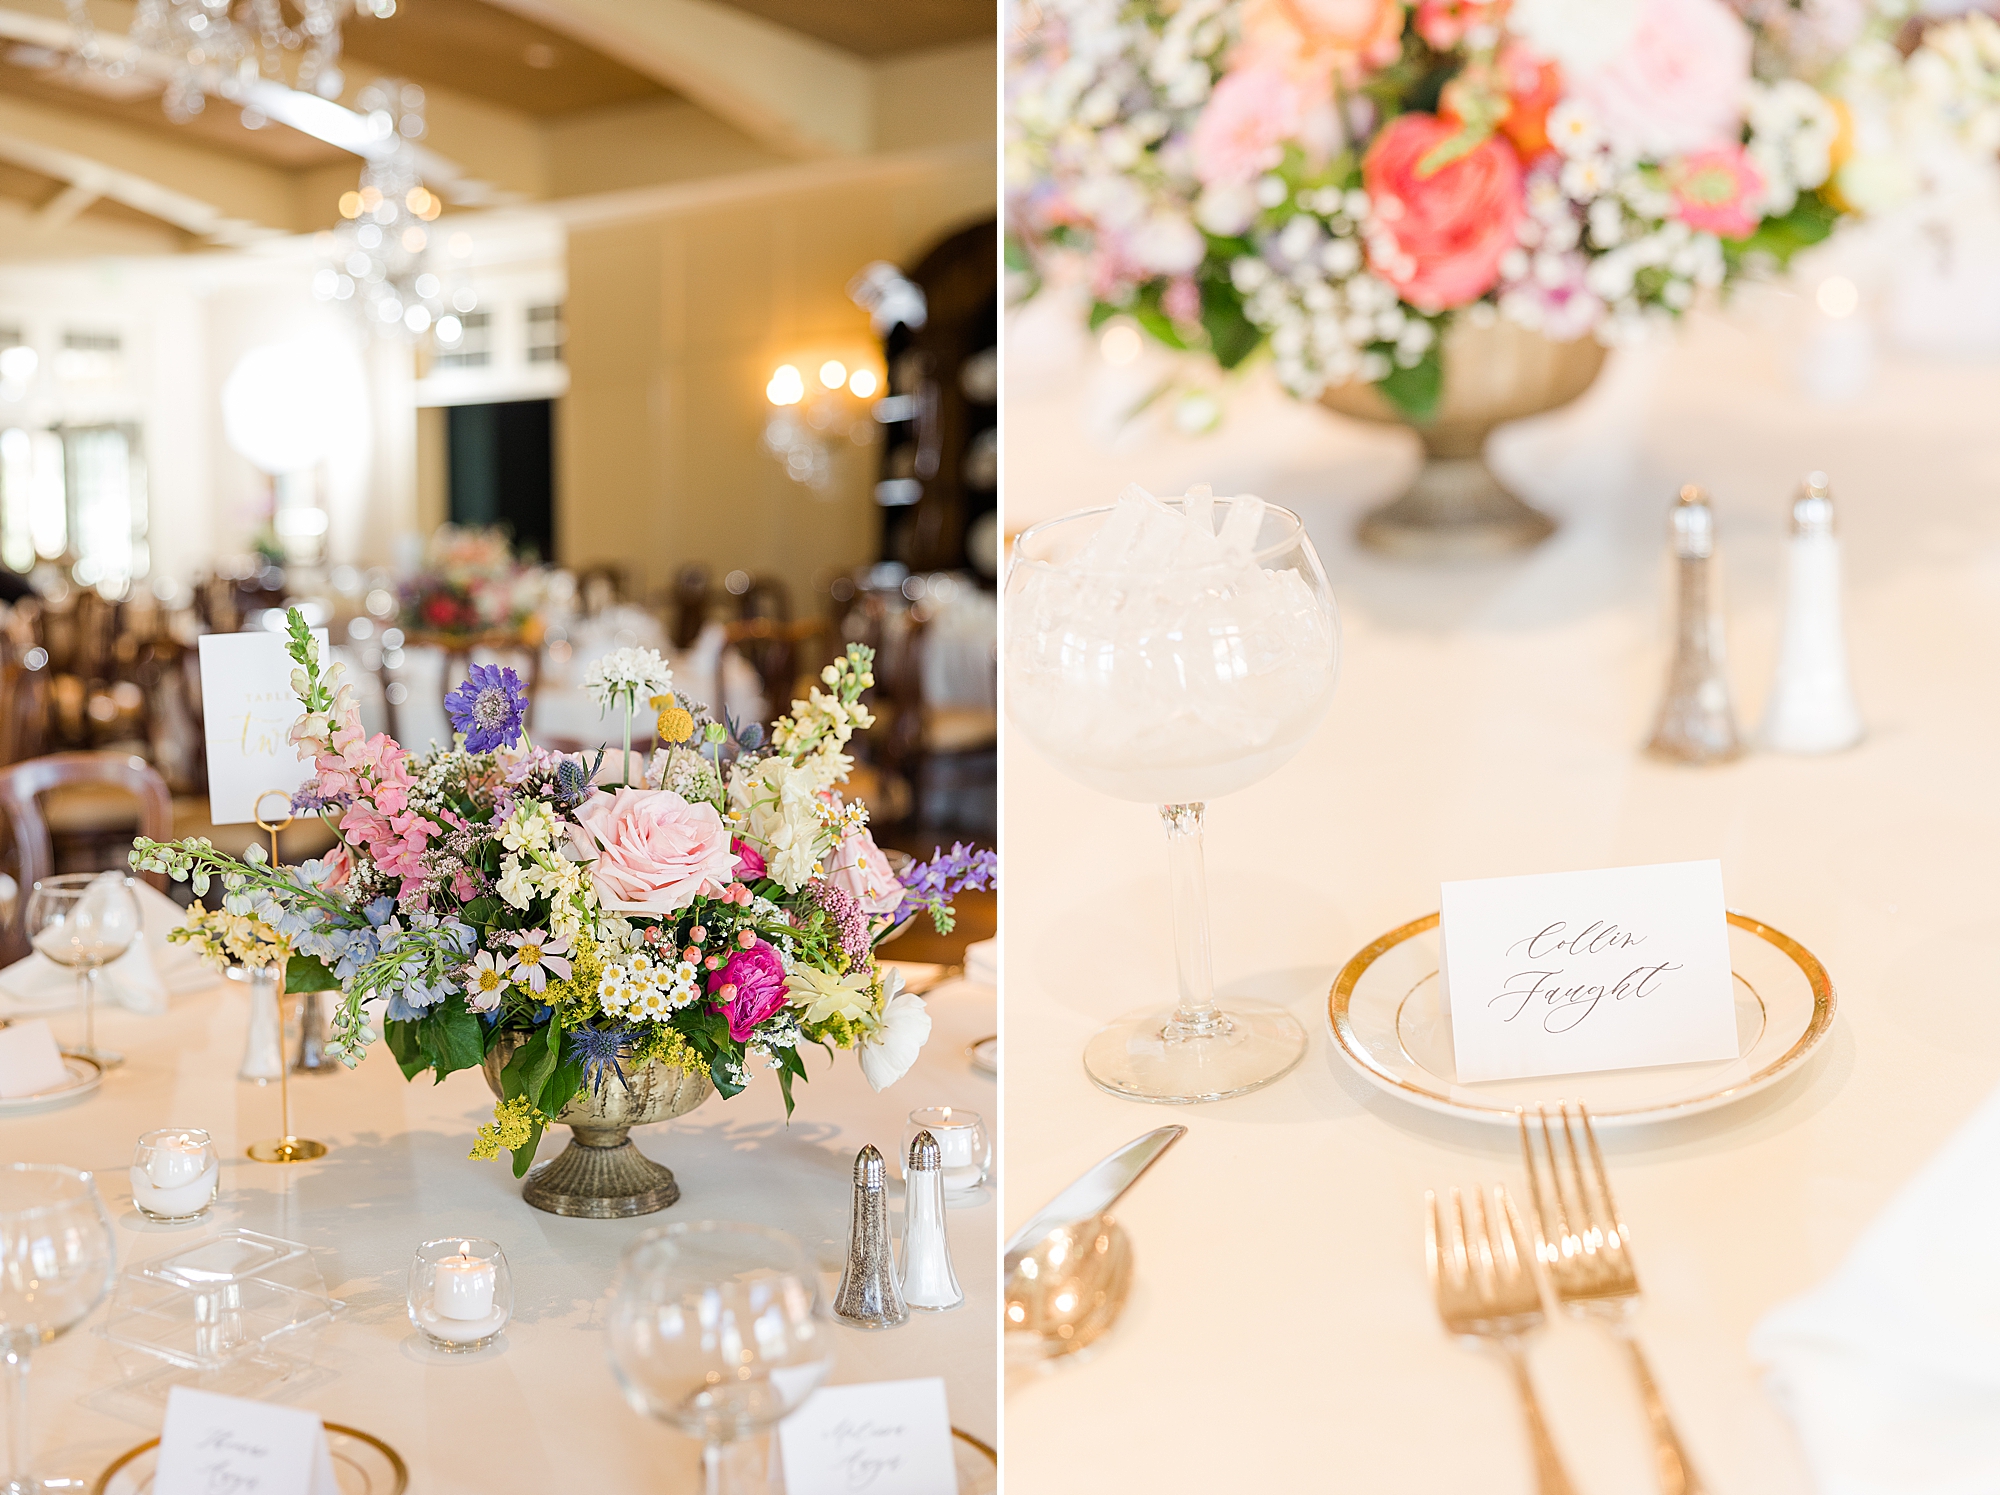 A stunning pastel floral centerpiece adorns a reception table, adding a pop of color and elegance.
